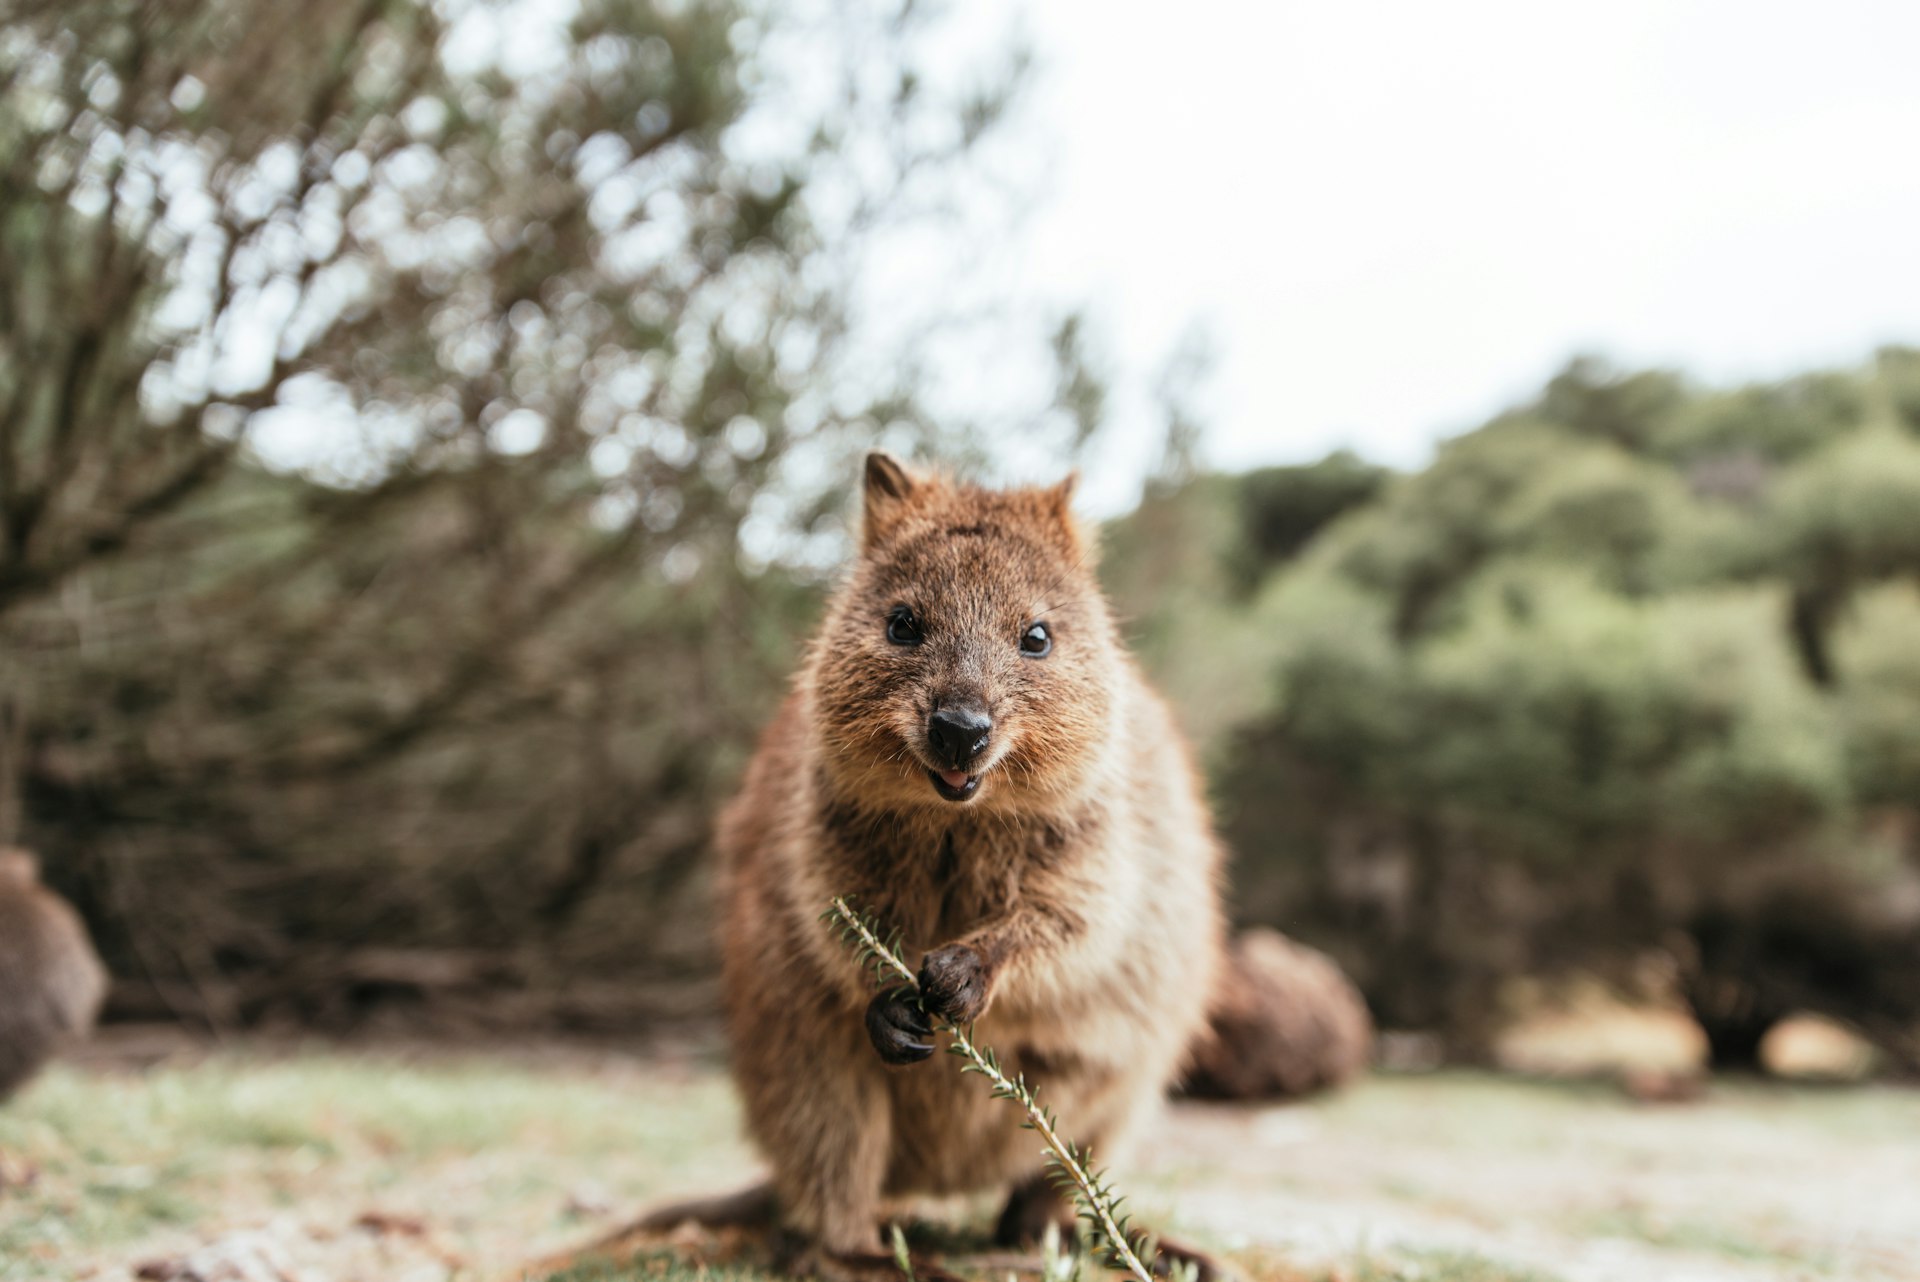 The quokka is one of Australia's most charming, quirky inhabitants